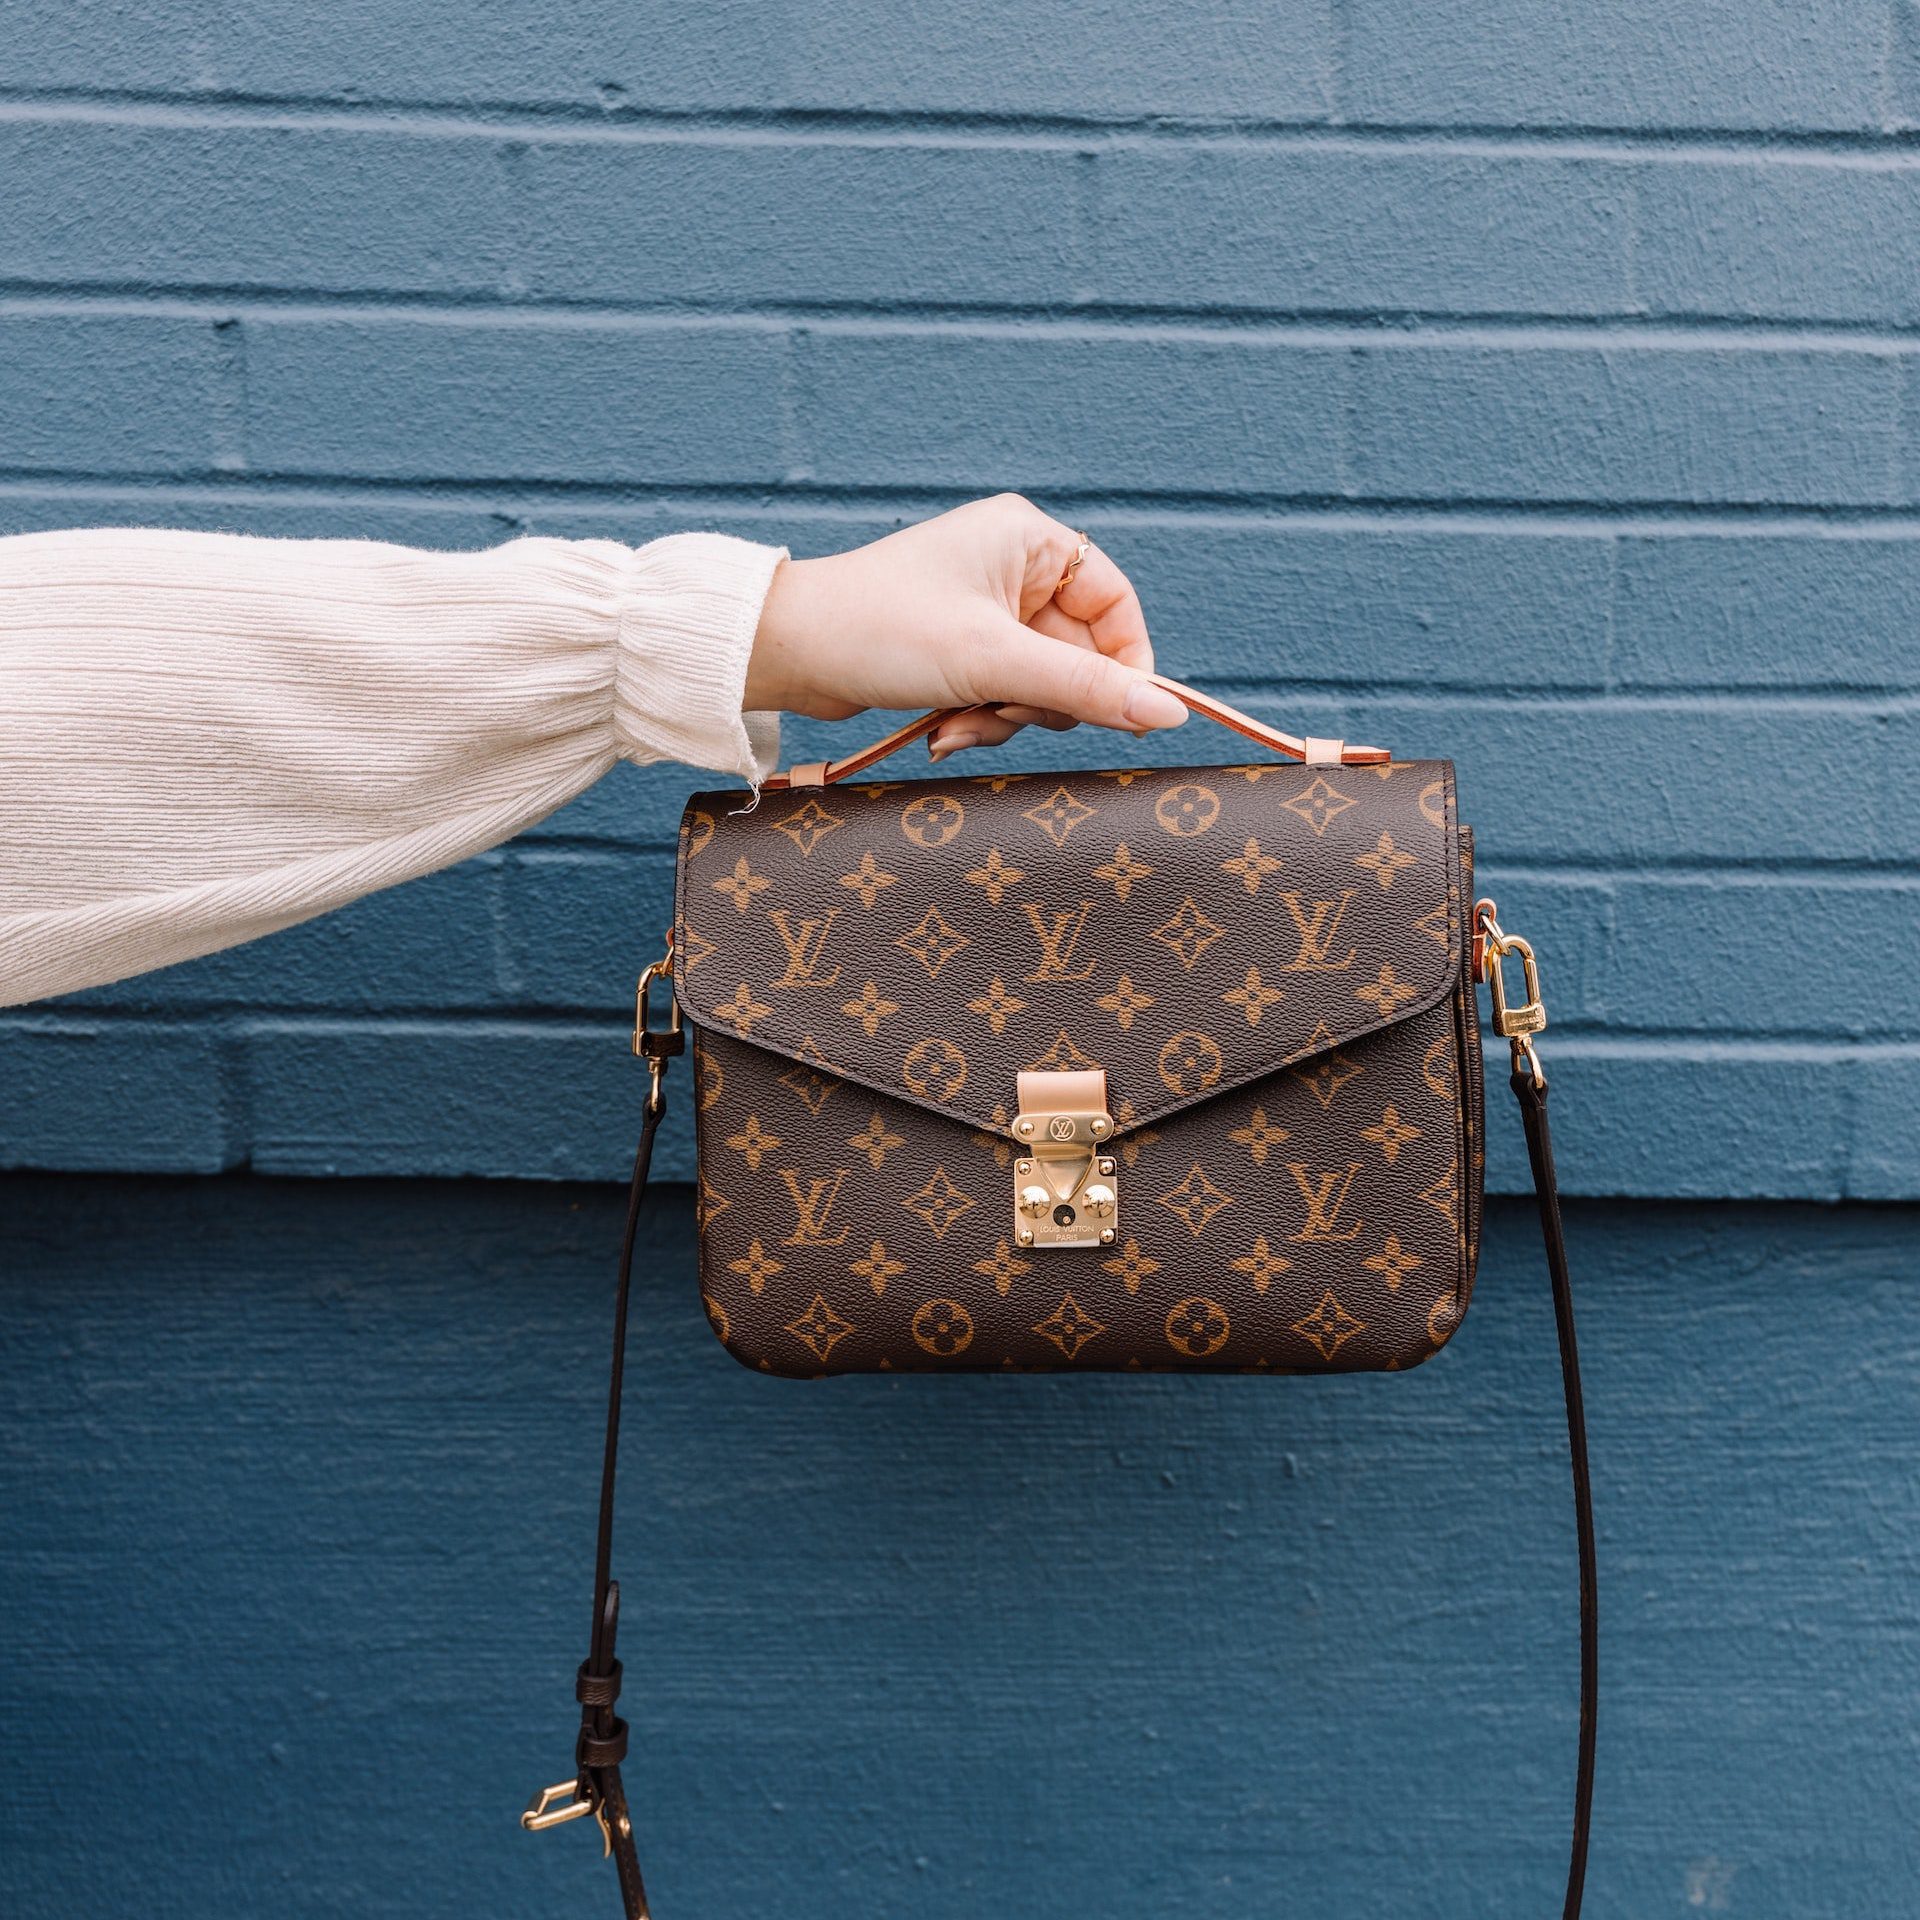 How to spot a fake Louis Vuitton handbag- by the experts at Borro